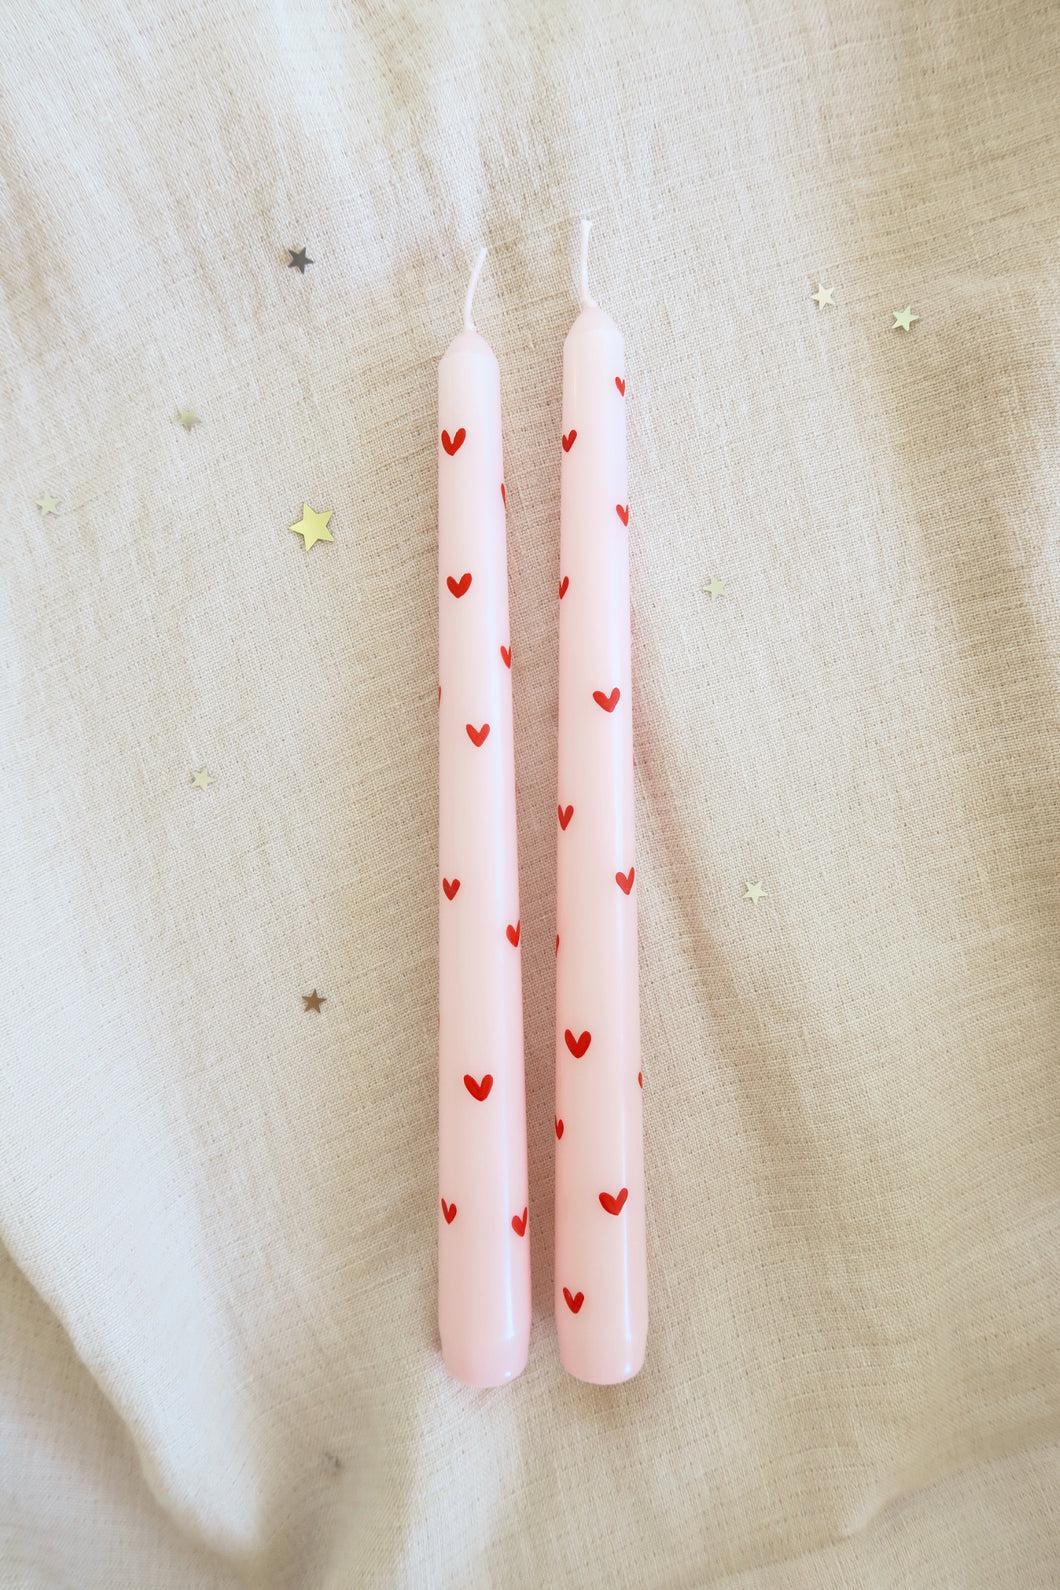 Sweet Hearts - PAIR of Hand Painted Candles